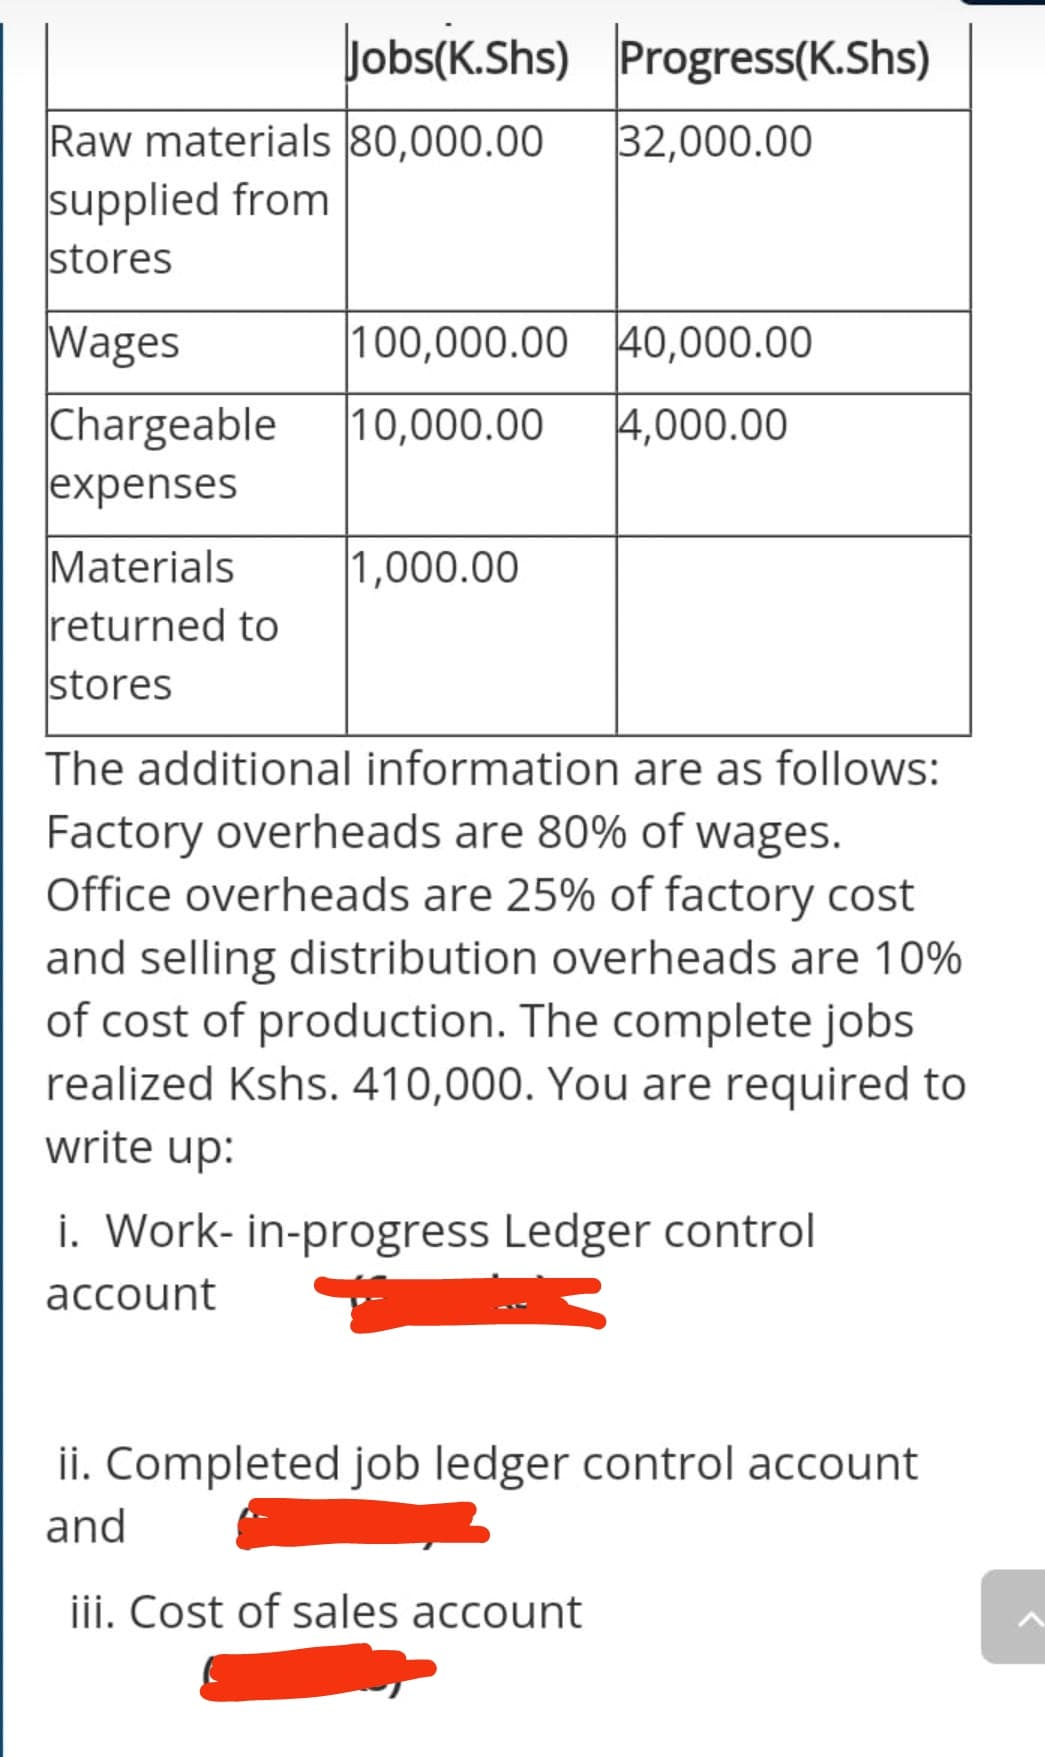 Jobs(K.Shs) Progress(K.Shs)
Raw materials 80,000.00
supplied from
stores
32,000.00
Wages
100,000.00 40,000.00
Chargeable
expenses
10,000.00
4,000.00
Materials
returned to
stores
1,000.00
The additional information are as follows:
Factory overheads are 80% of wages.
Office overheads are 25% of factory cost
and selling distribution overheads are 10%
of cost of production. The complete jobs
realized Kshs. 410,000. You are required to
write up:
i. Work- in-progress Ledger control
account
ii. Completed job ledger control account
and
iii. Cost of sales account
